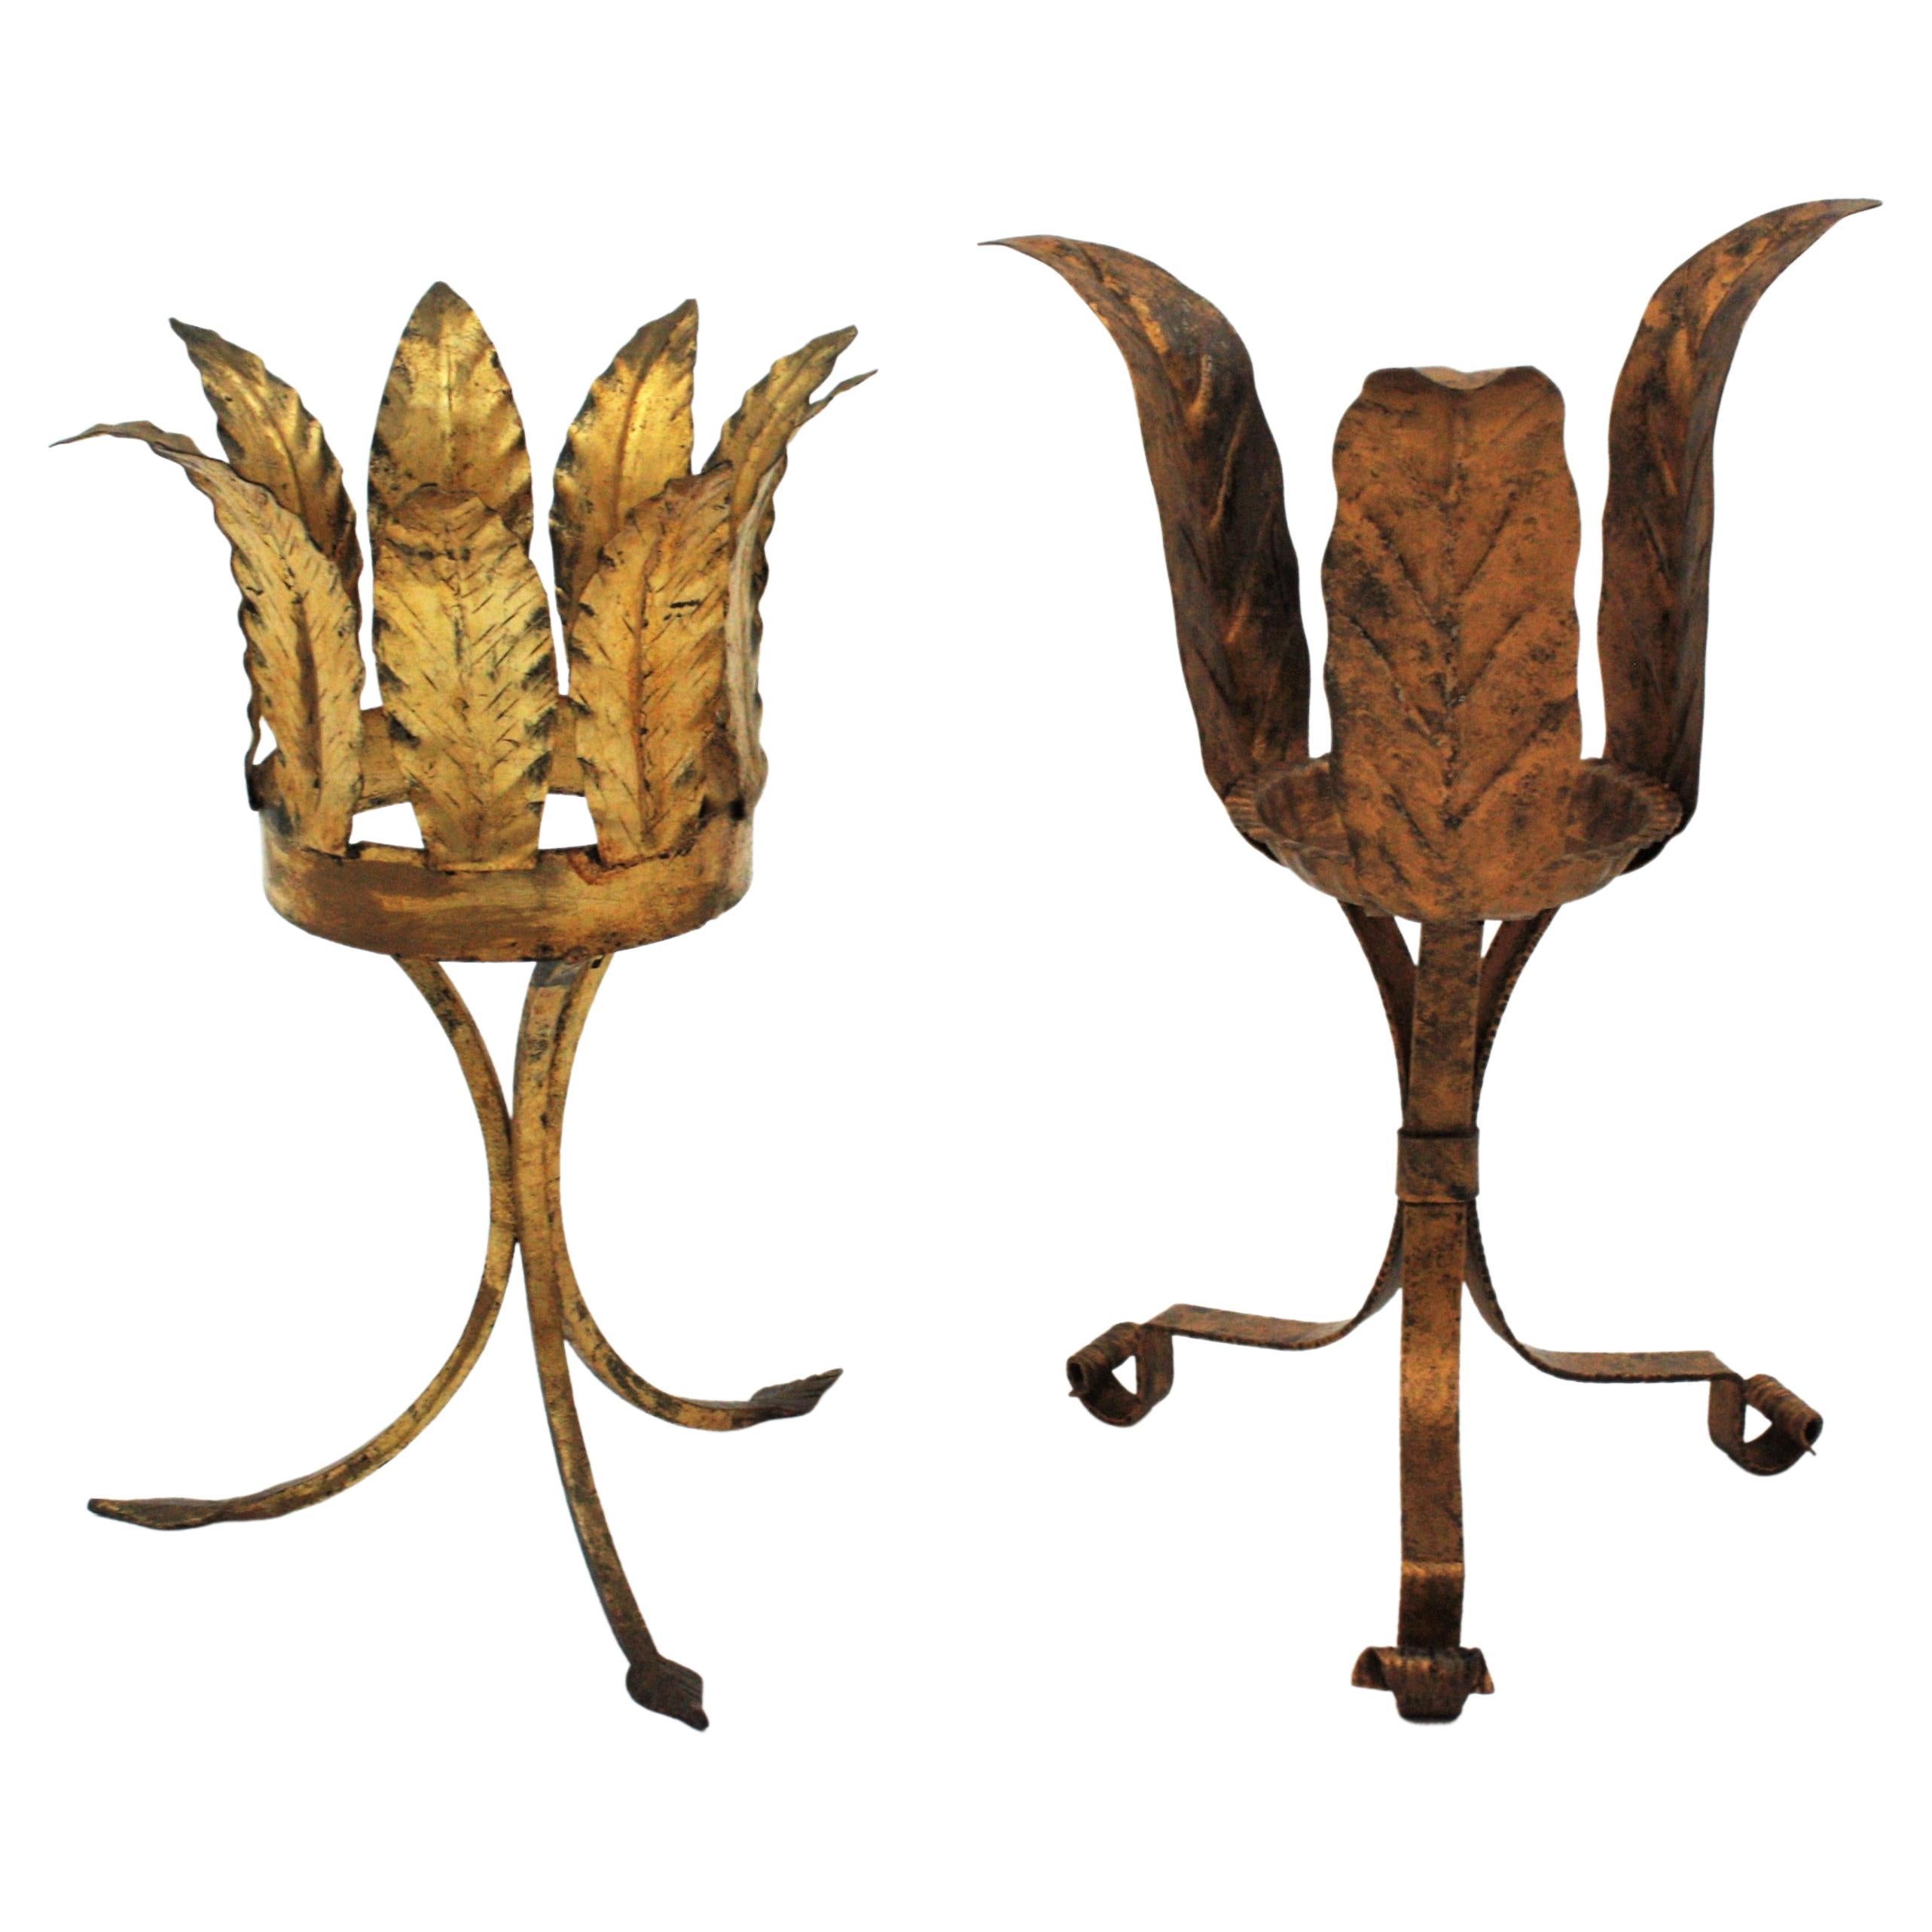 Unmatching Pair of Plant Stands or Jardinières in Gilt Iron